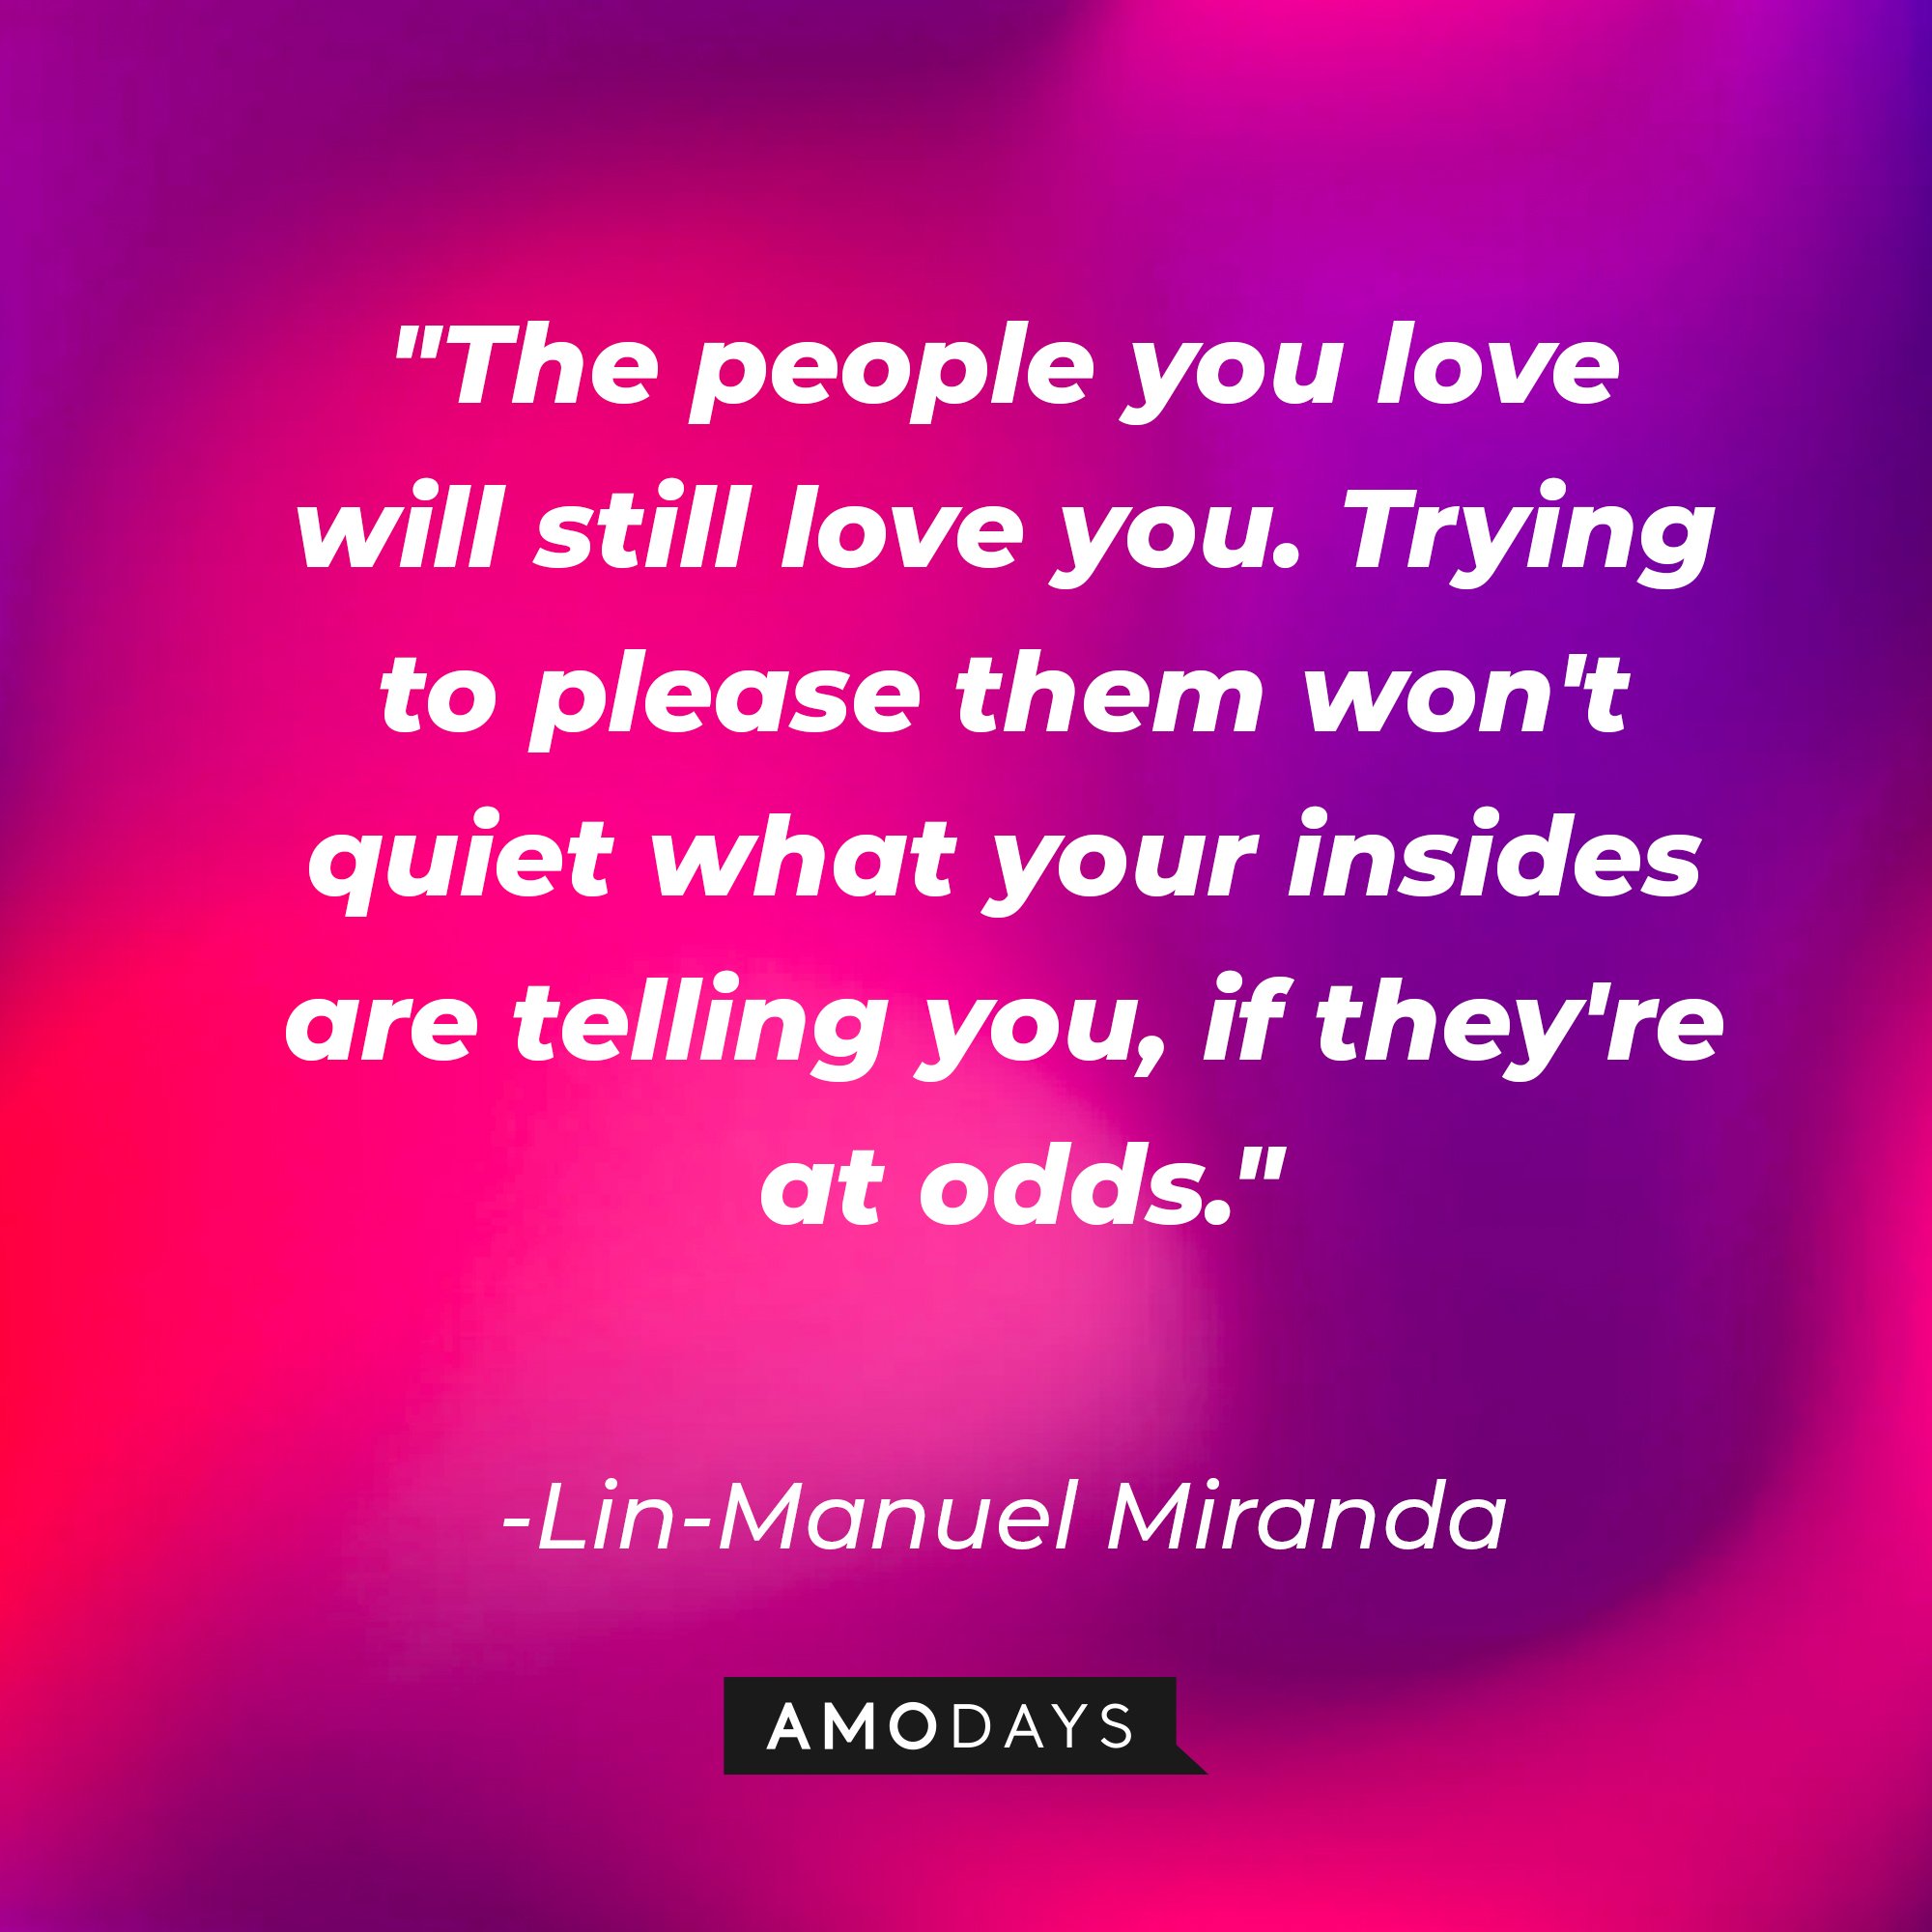 Lin-Manuel Miranda's quote: "The people you love will still love you. Trying to please them won't quiet what your insides are telling you, if they're at odds." | Image: AmoDays